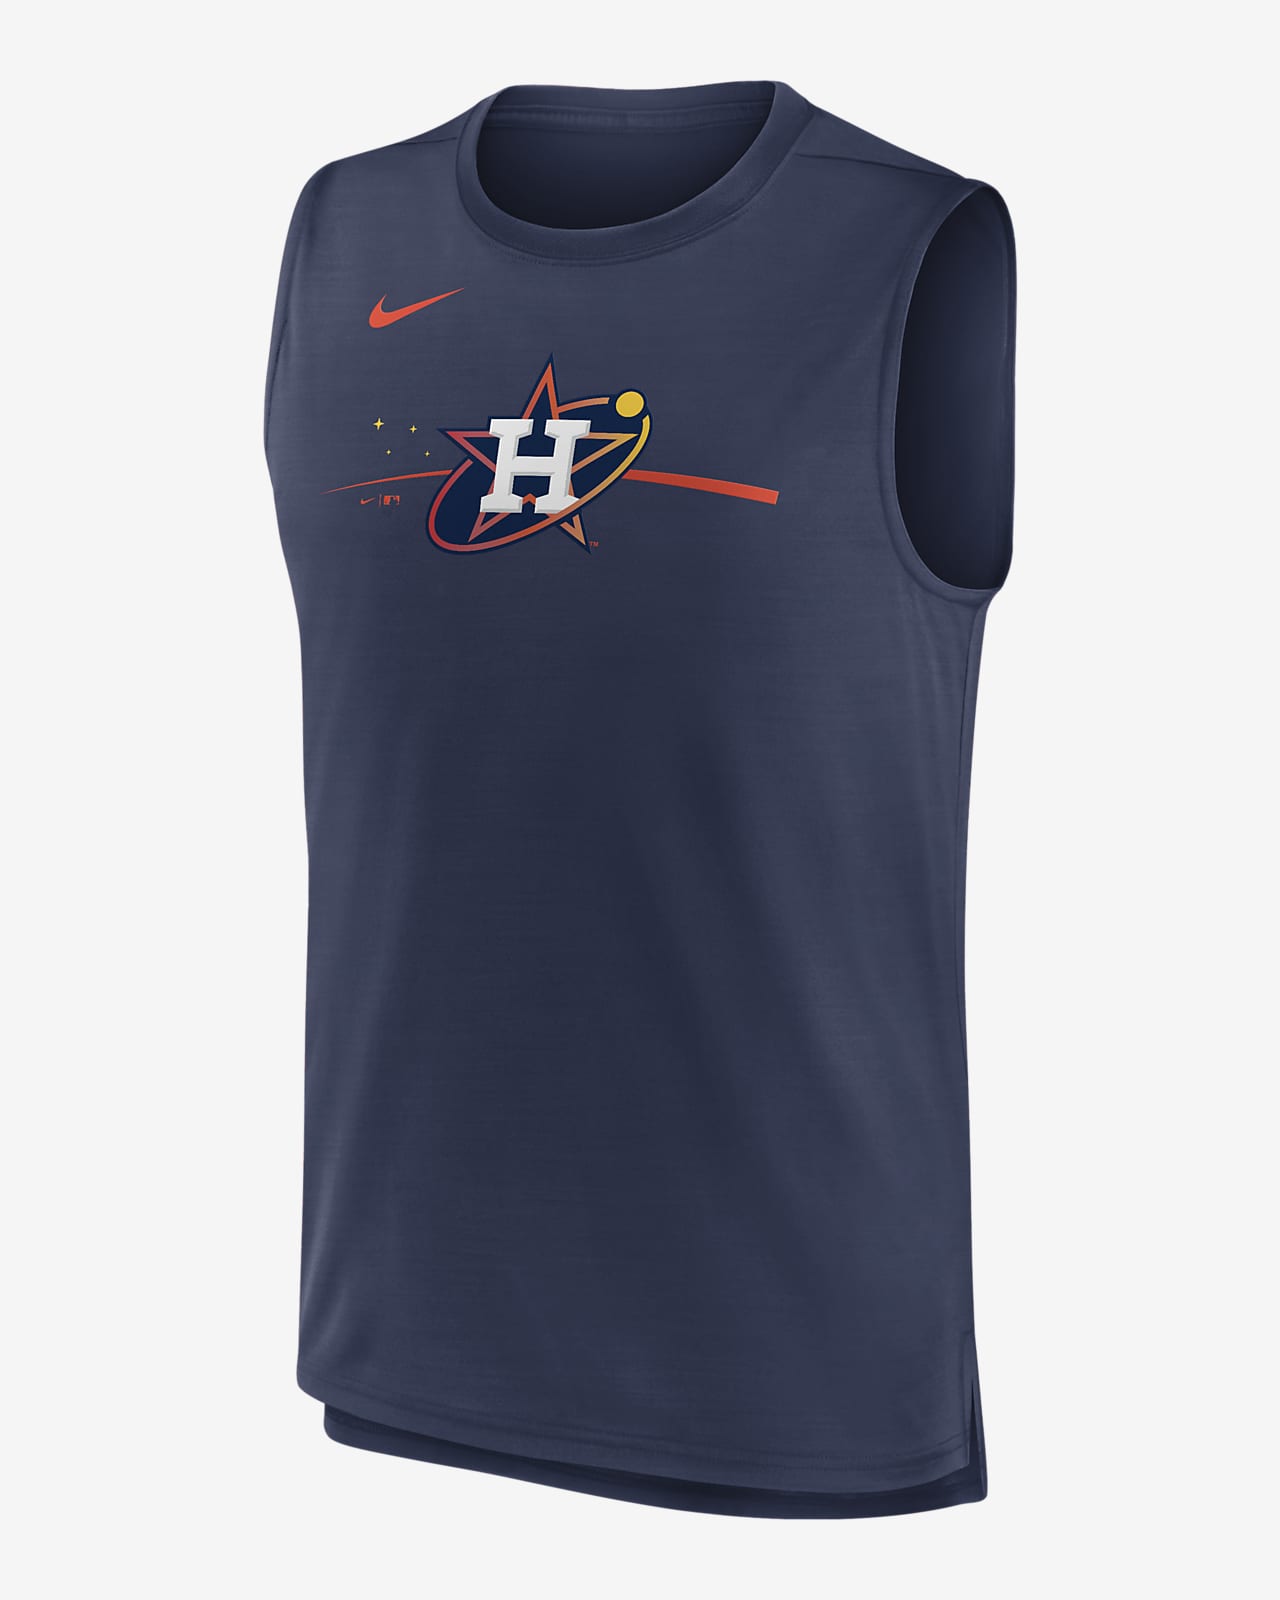 mlb city connect astros